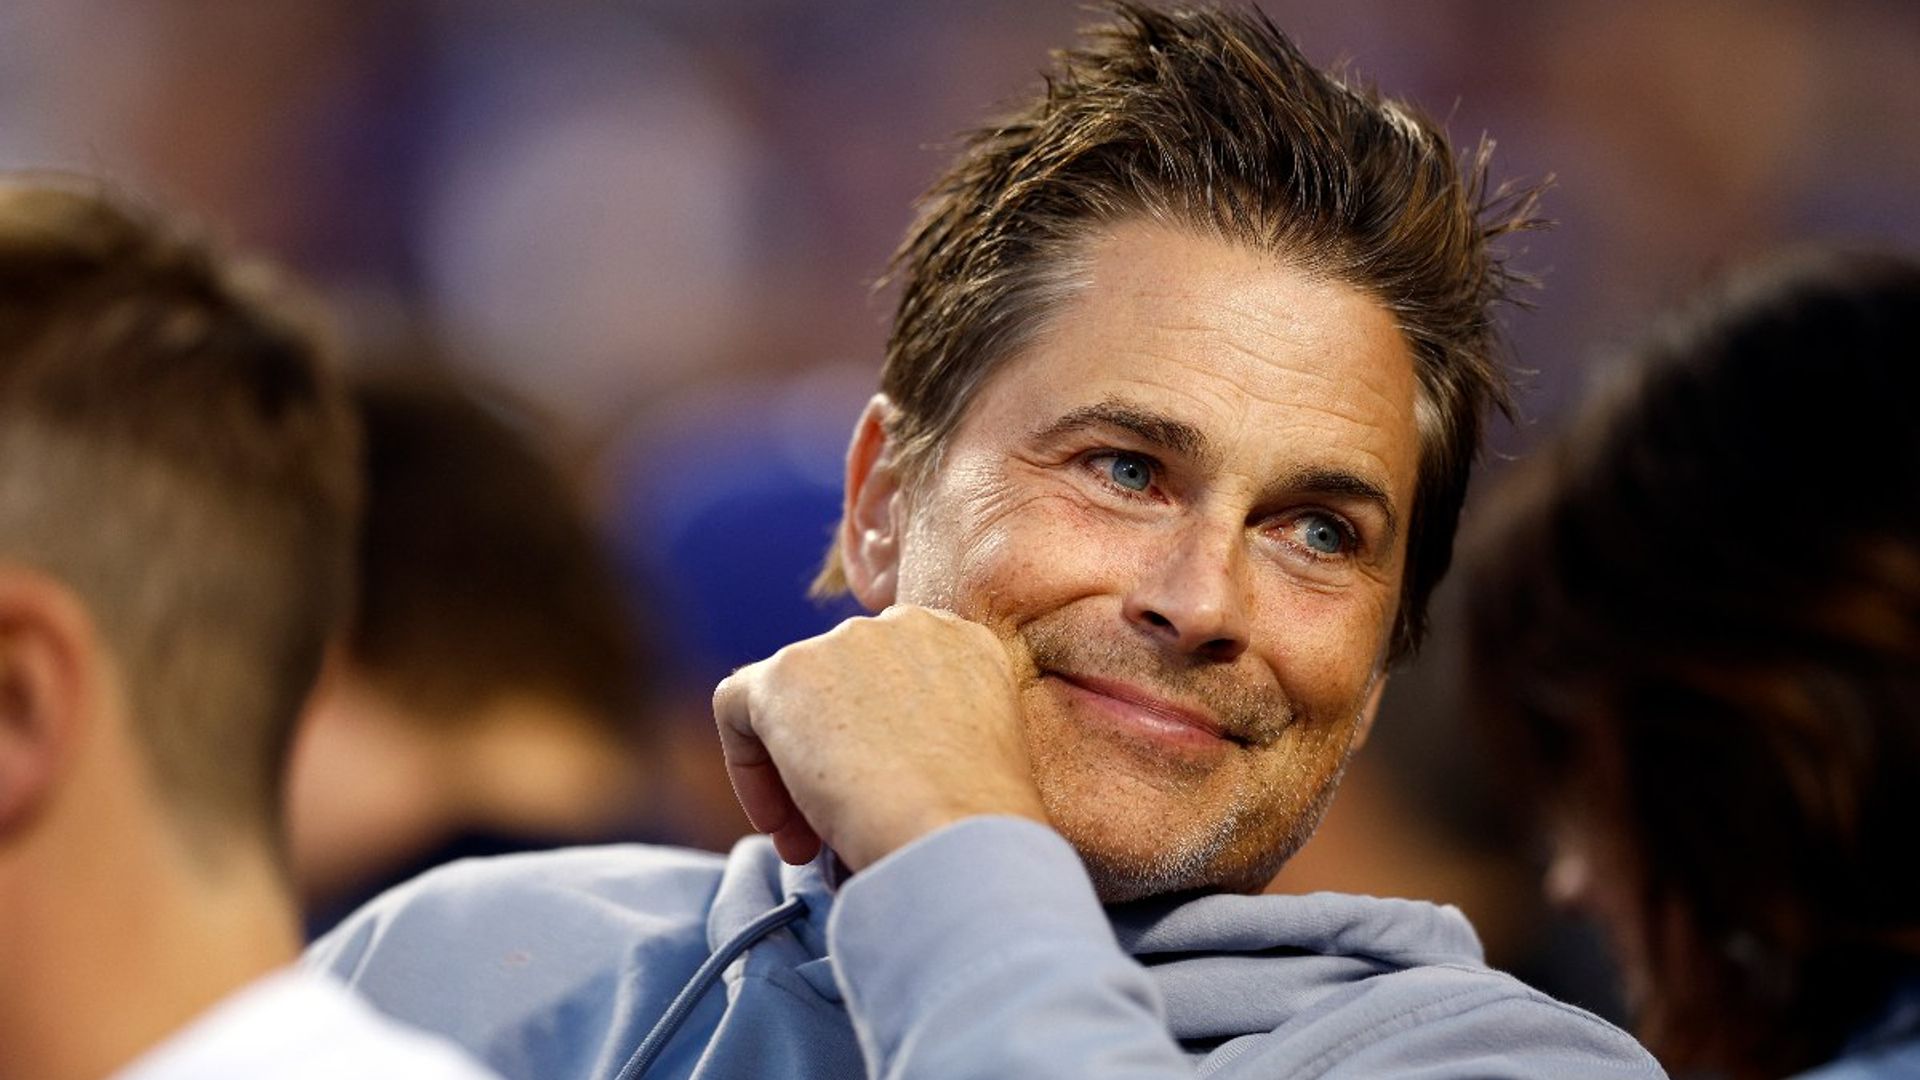 9-1-1: Lone star actor Rob Lowe leaves fans swooning with new post